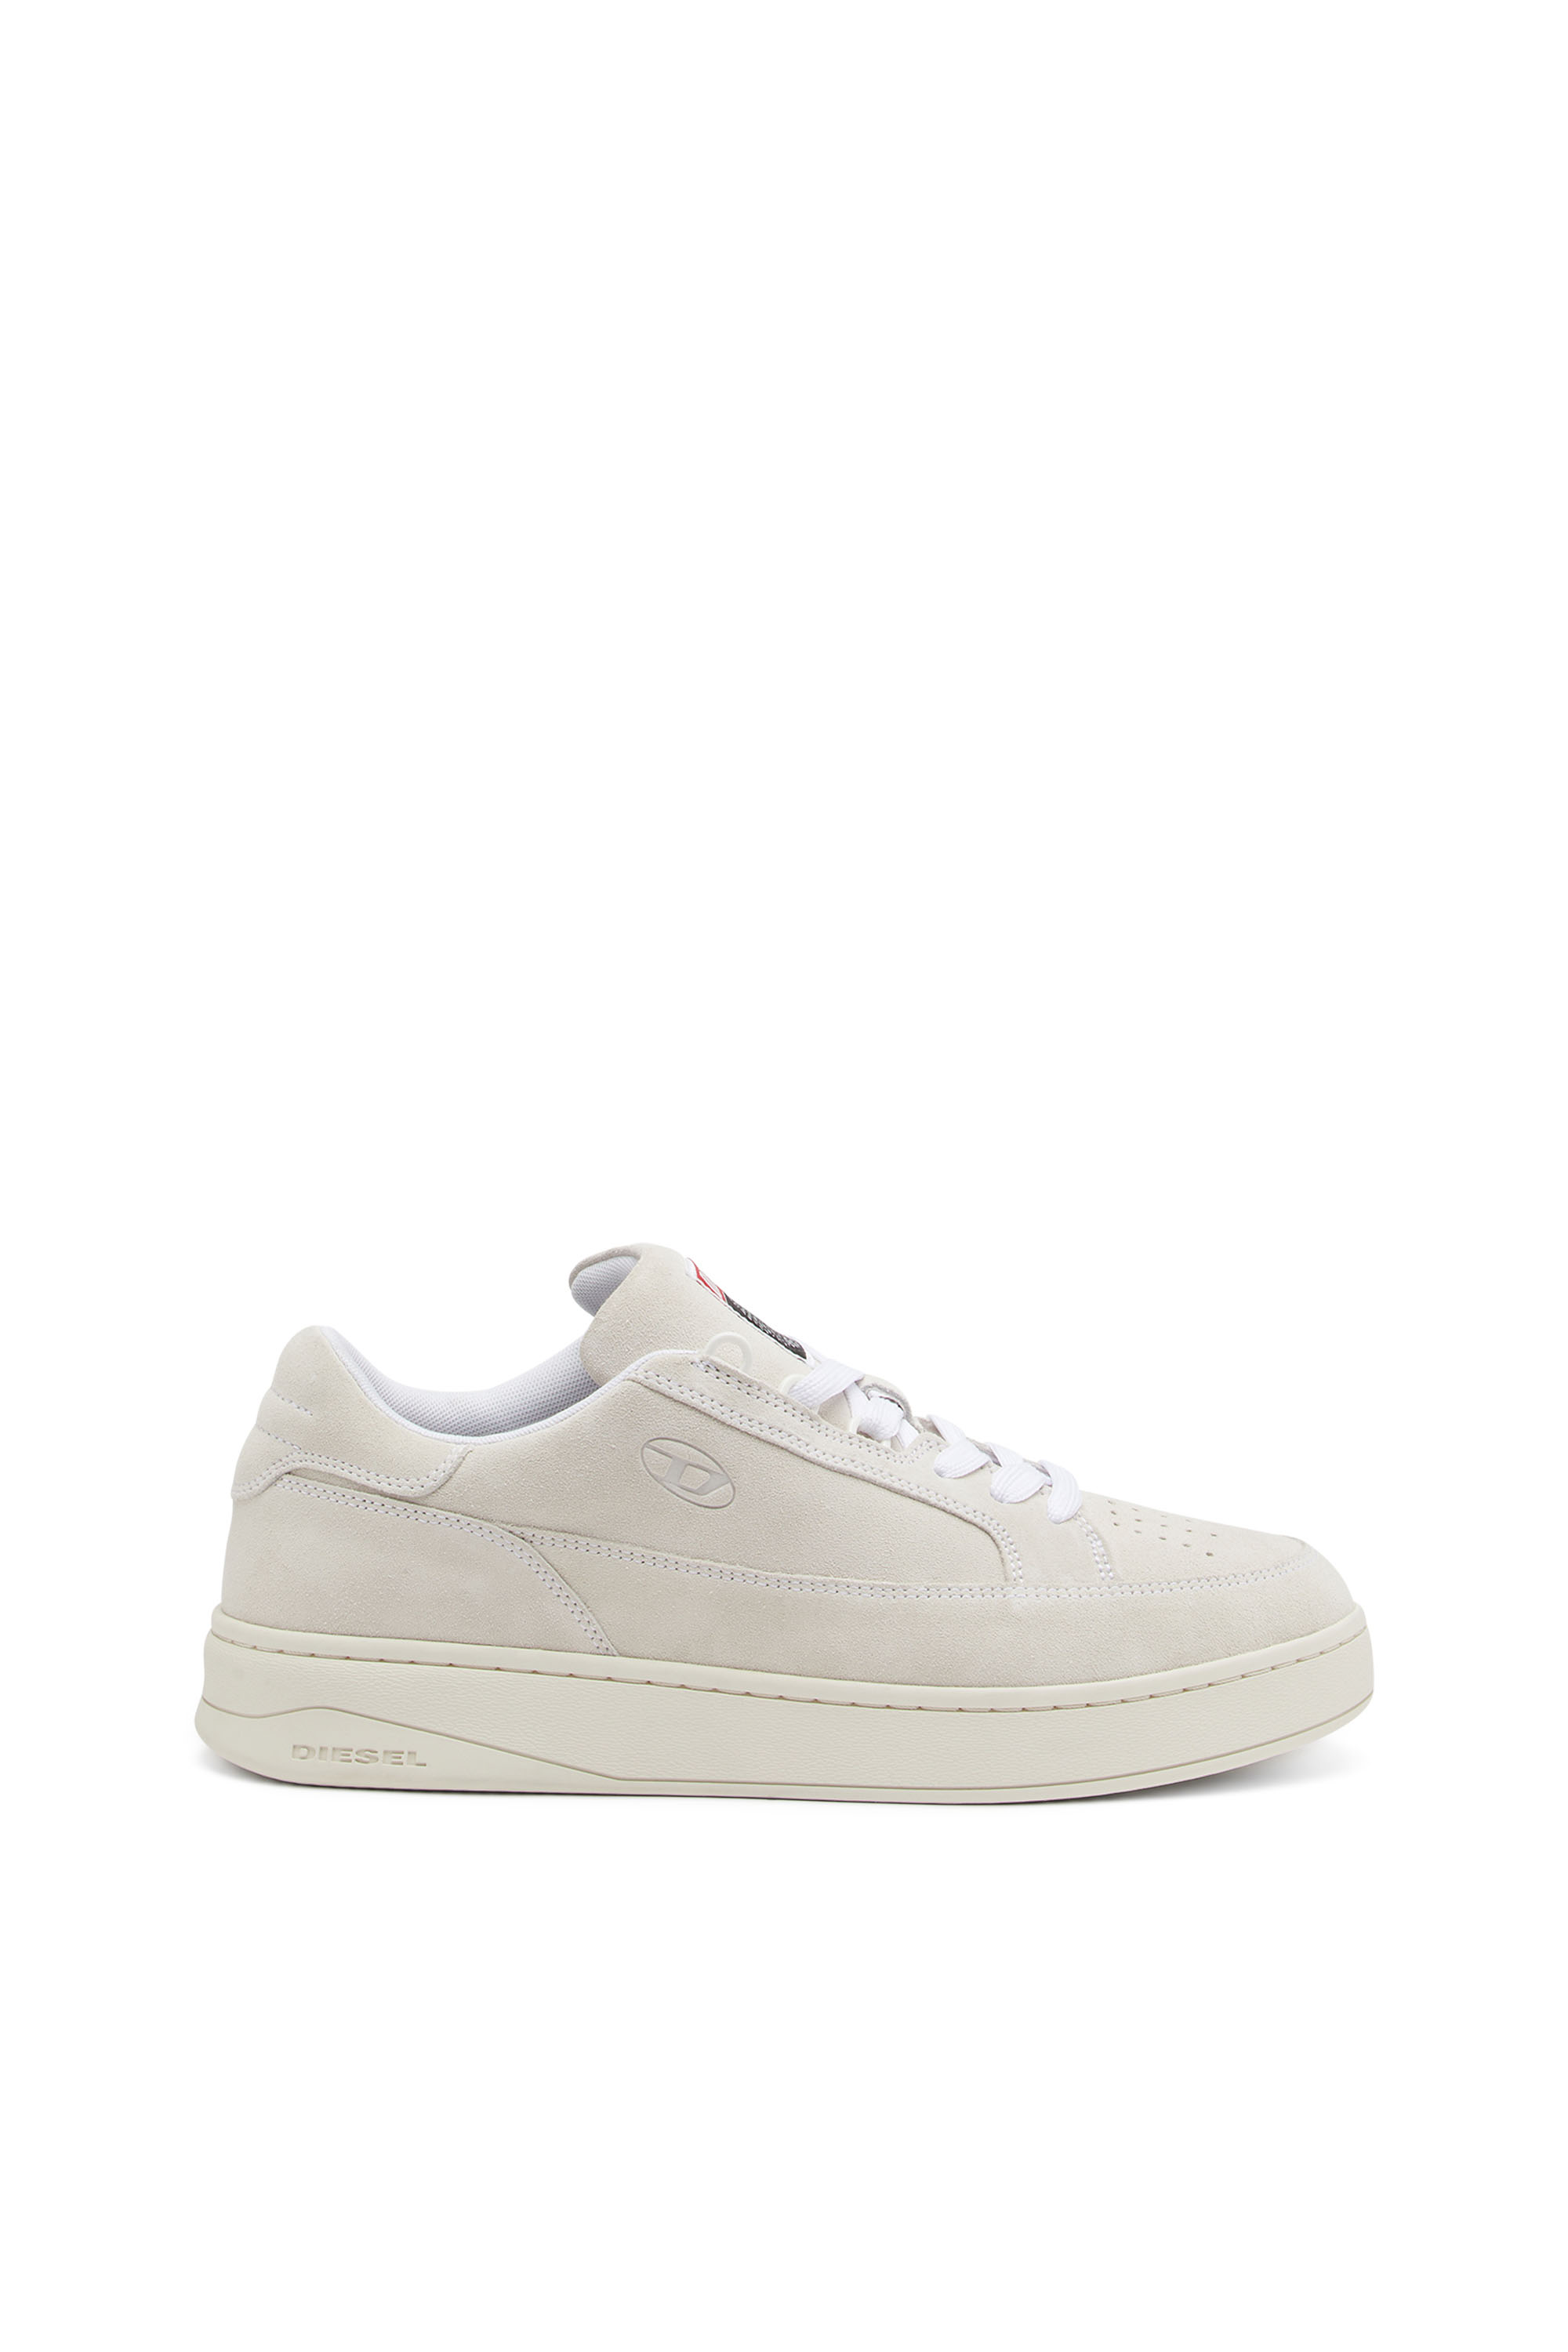 S-SINNA LOW X Unisex: Suede trainers with oval D logo | Diesel